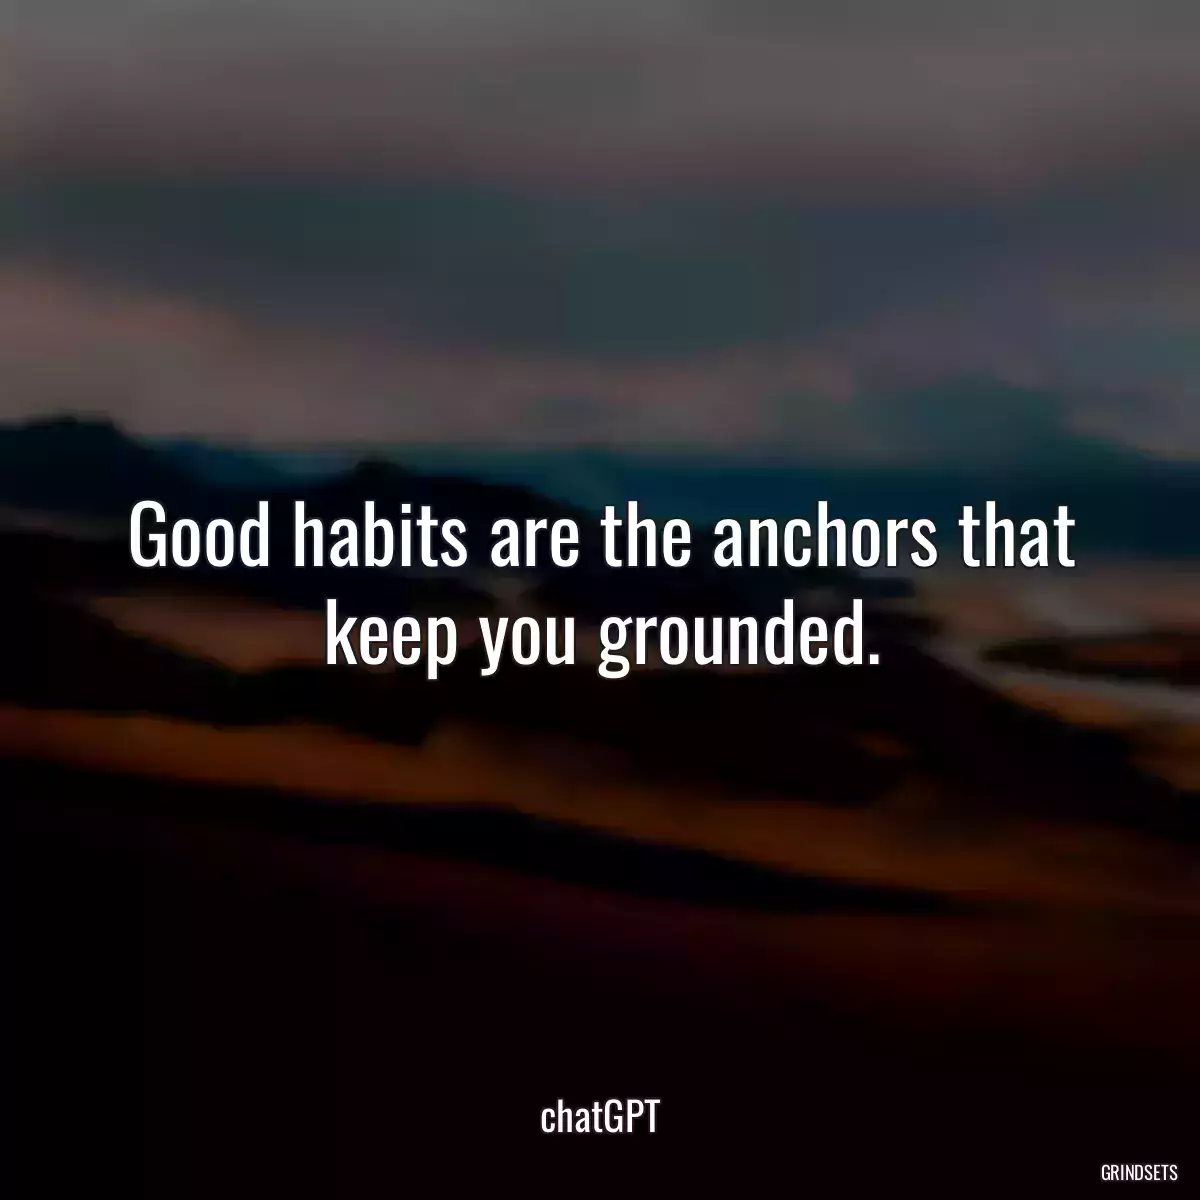 Good habits are the anchors that keep you grounded.